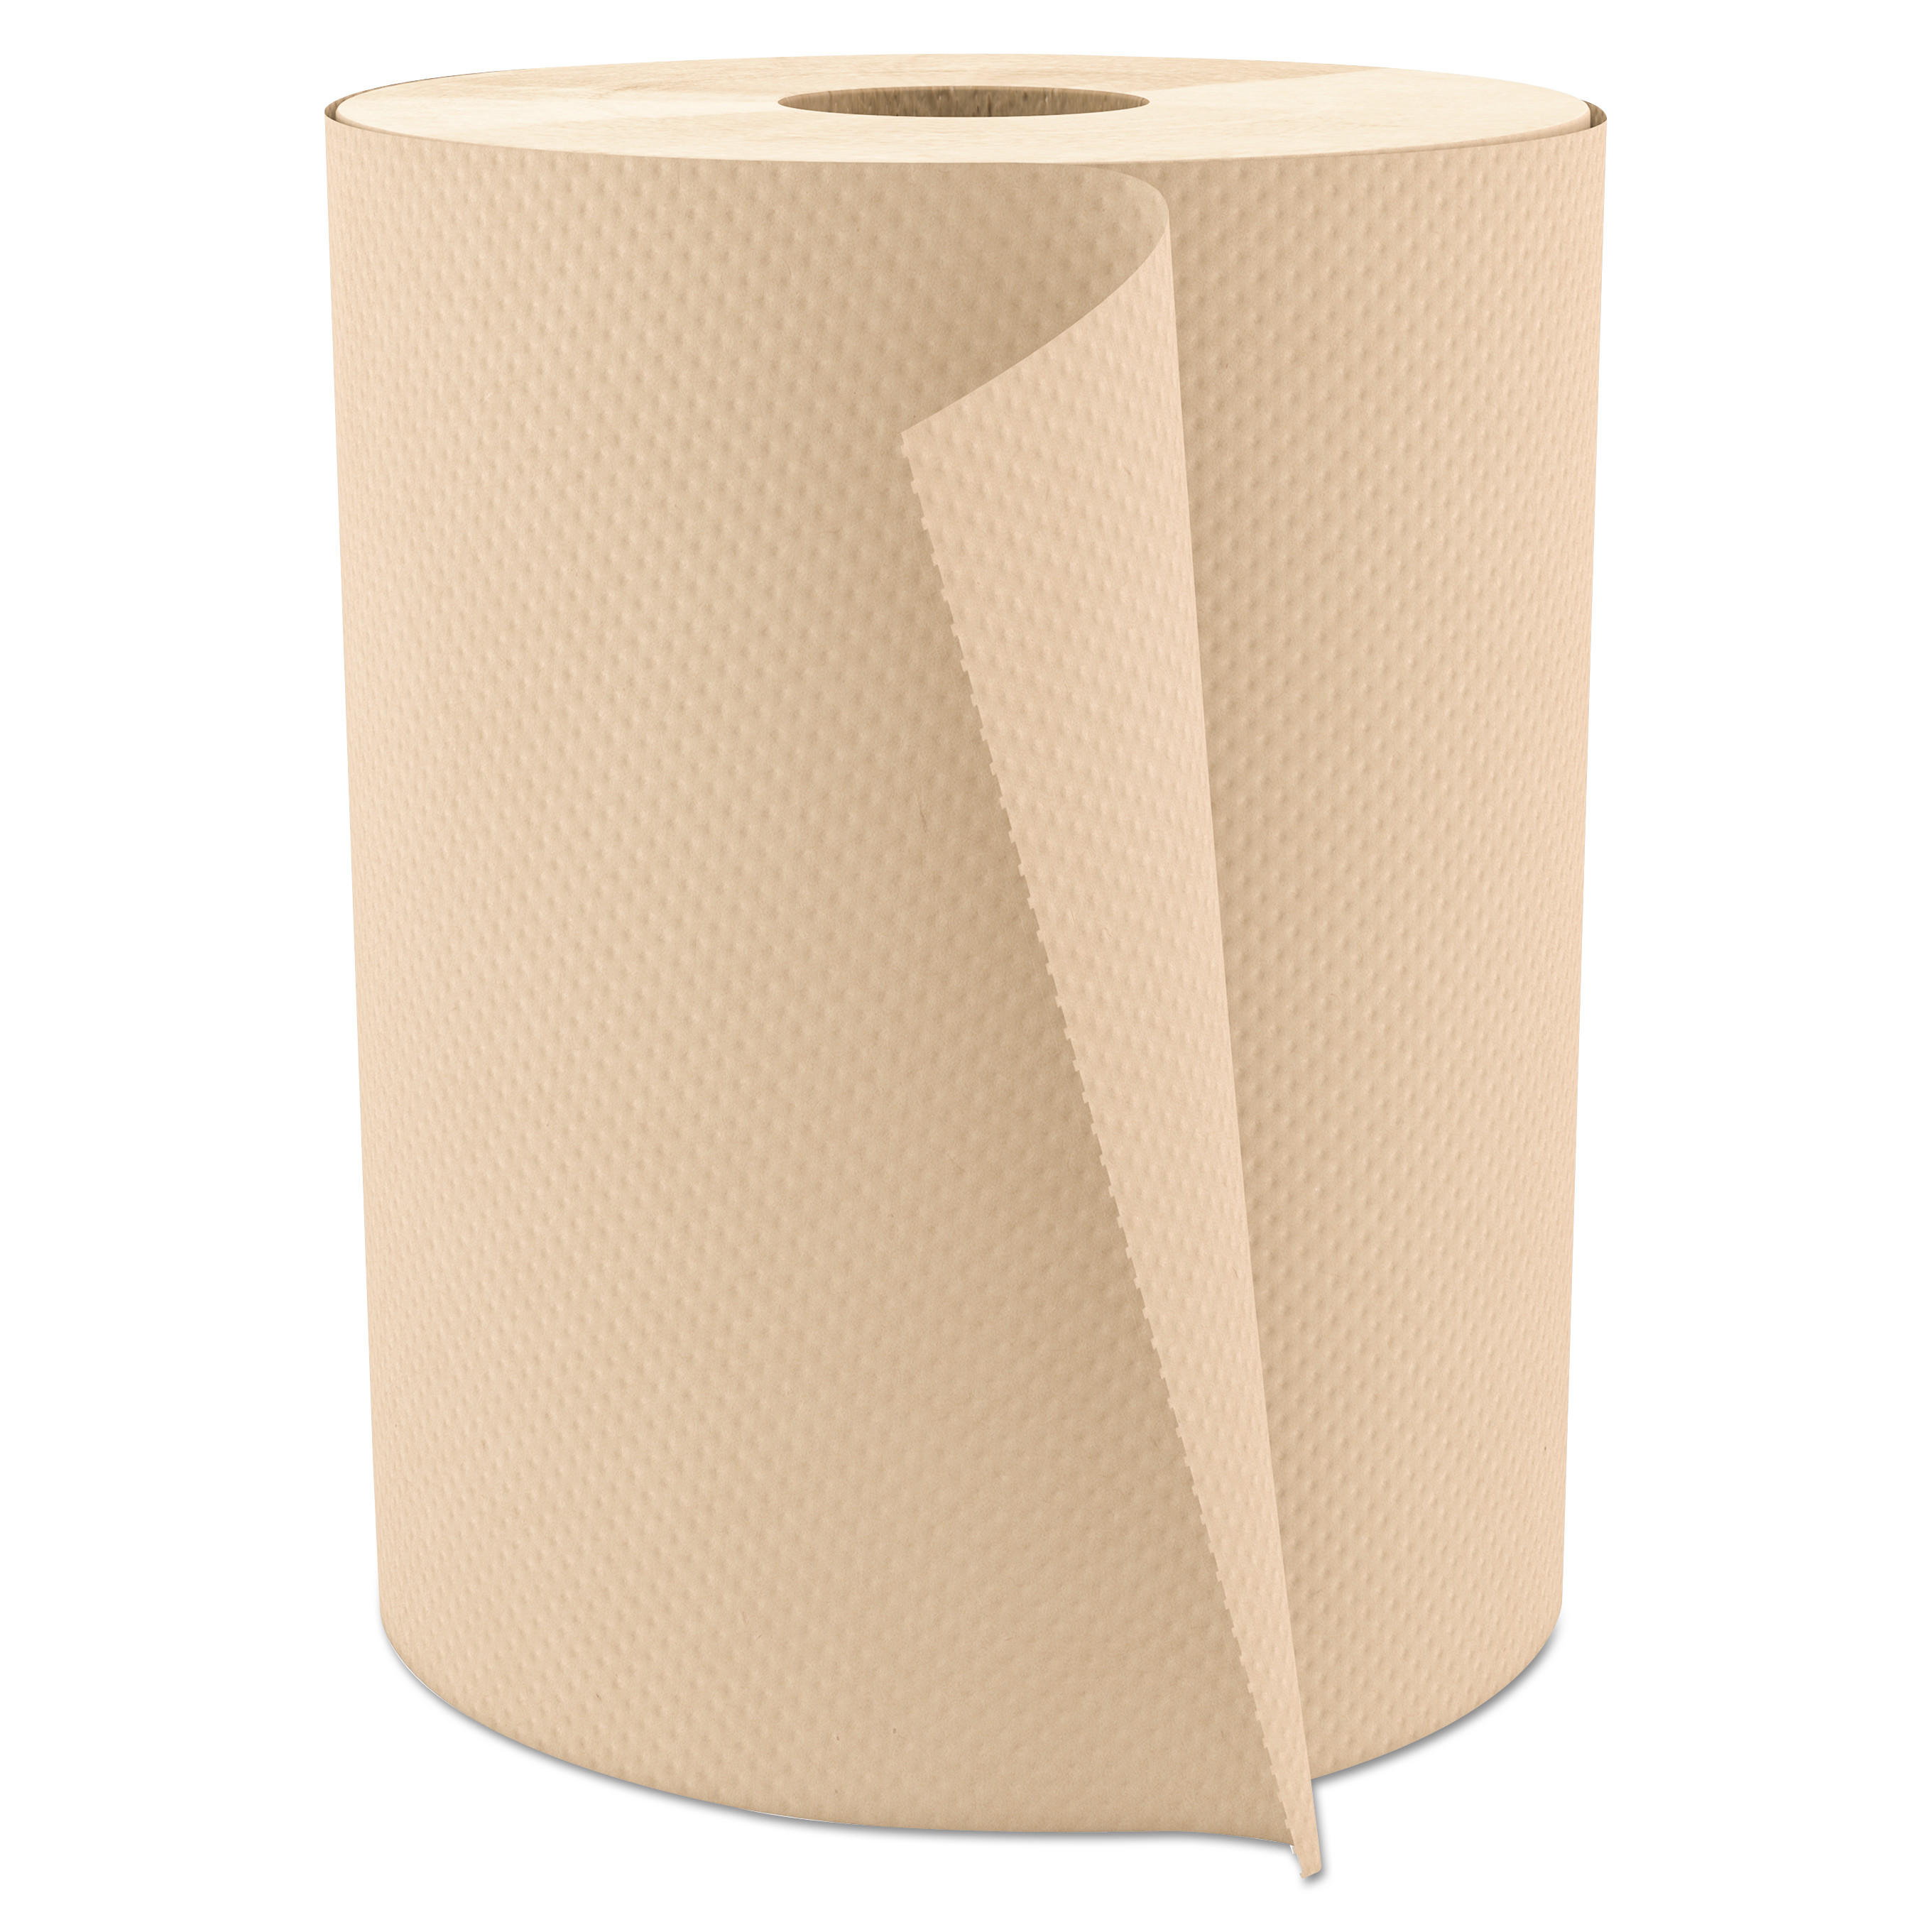 Select Roll Paper Towels, 1-Ply, 7.875 x 600 ft, Natural, 12/Carton